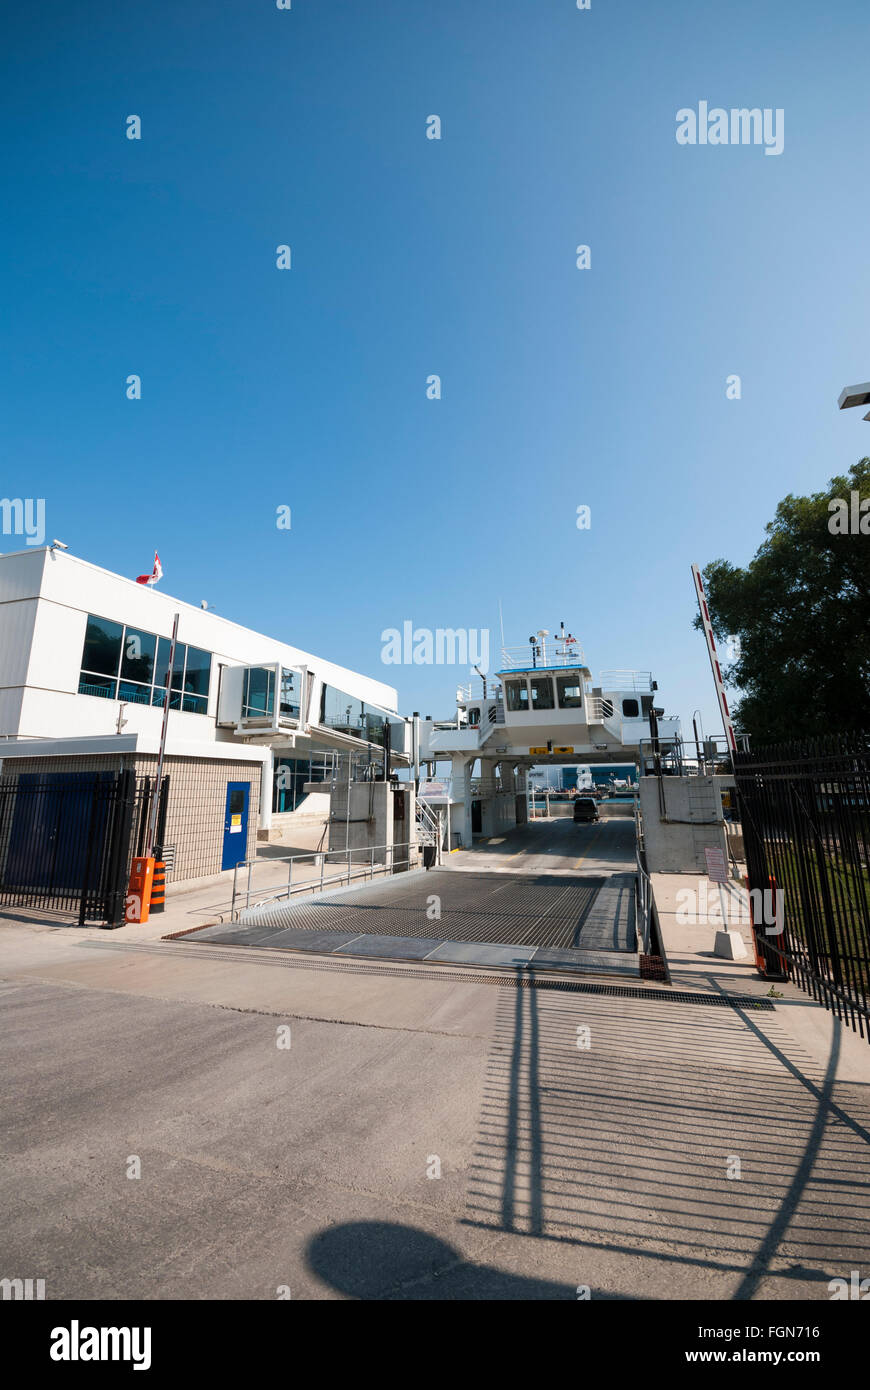 The worlds shortest ferry ride at 120m (400 feet) ready to load cars and passengers for a trip to the Toronto's Island airport. Stock Photo